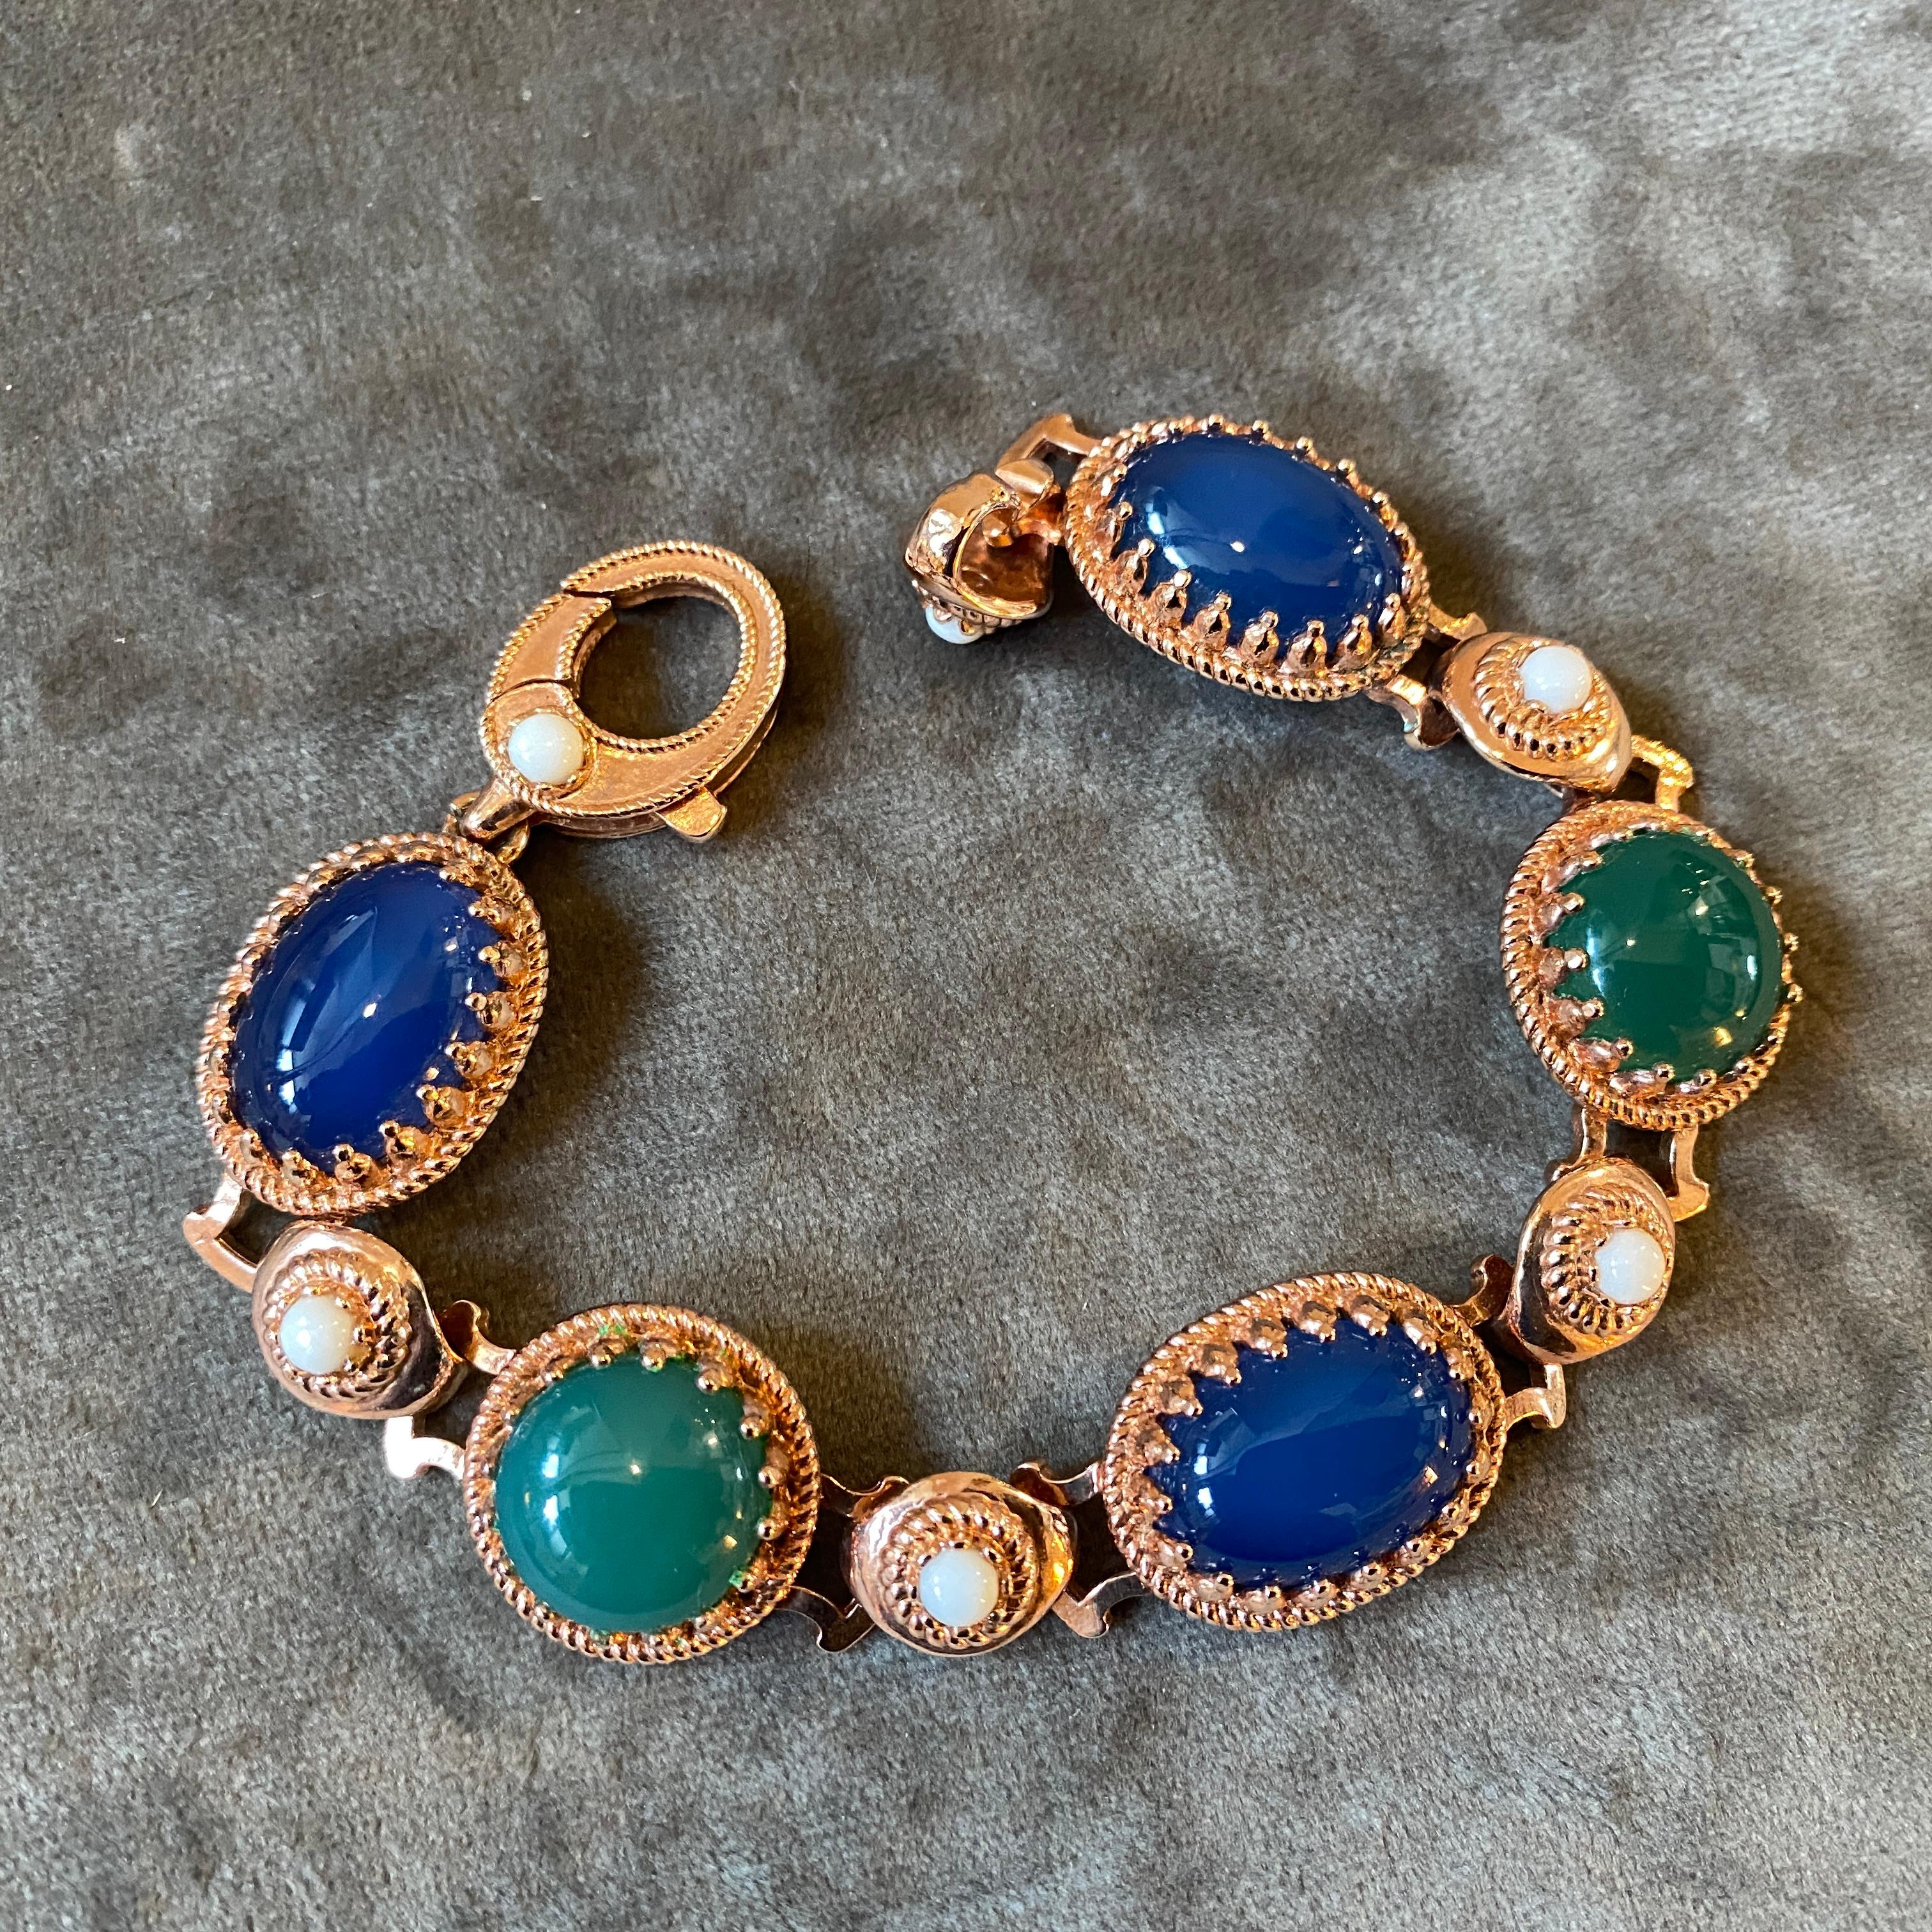 An high quality fashion jewelry bracelet hand-crafted in Italy in the Nineties, gilded bronze and cabochon agate are in perfect conditions. It's a beautiful piece of custom jewelry that showcases the natural beauty of agate stones. Anomis was a